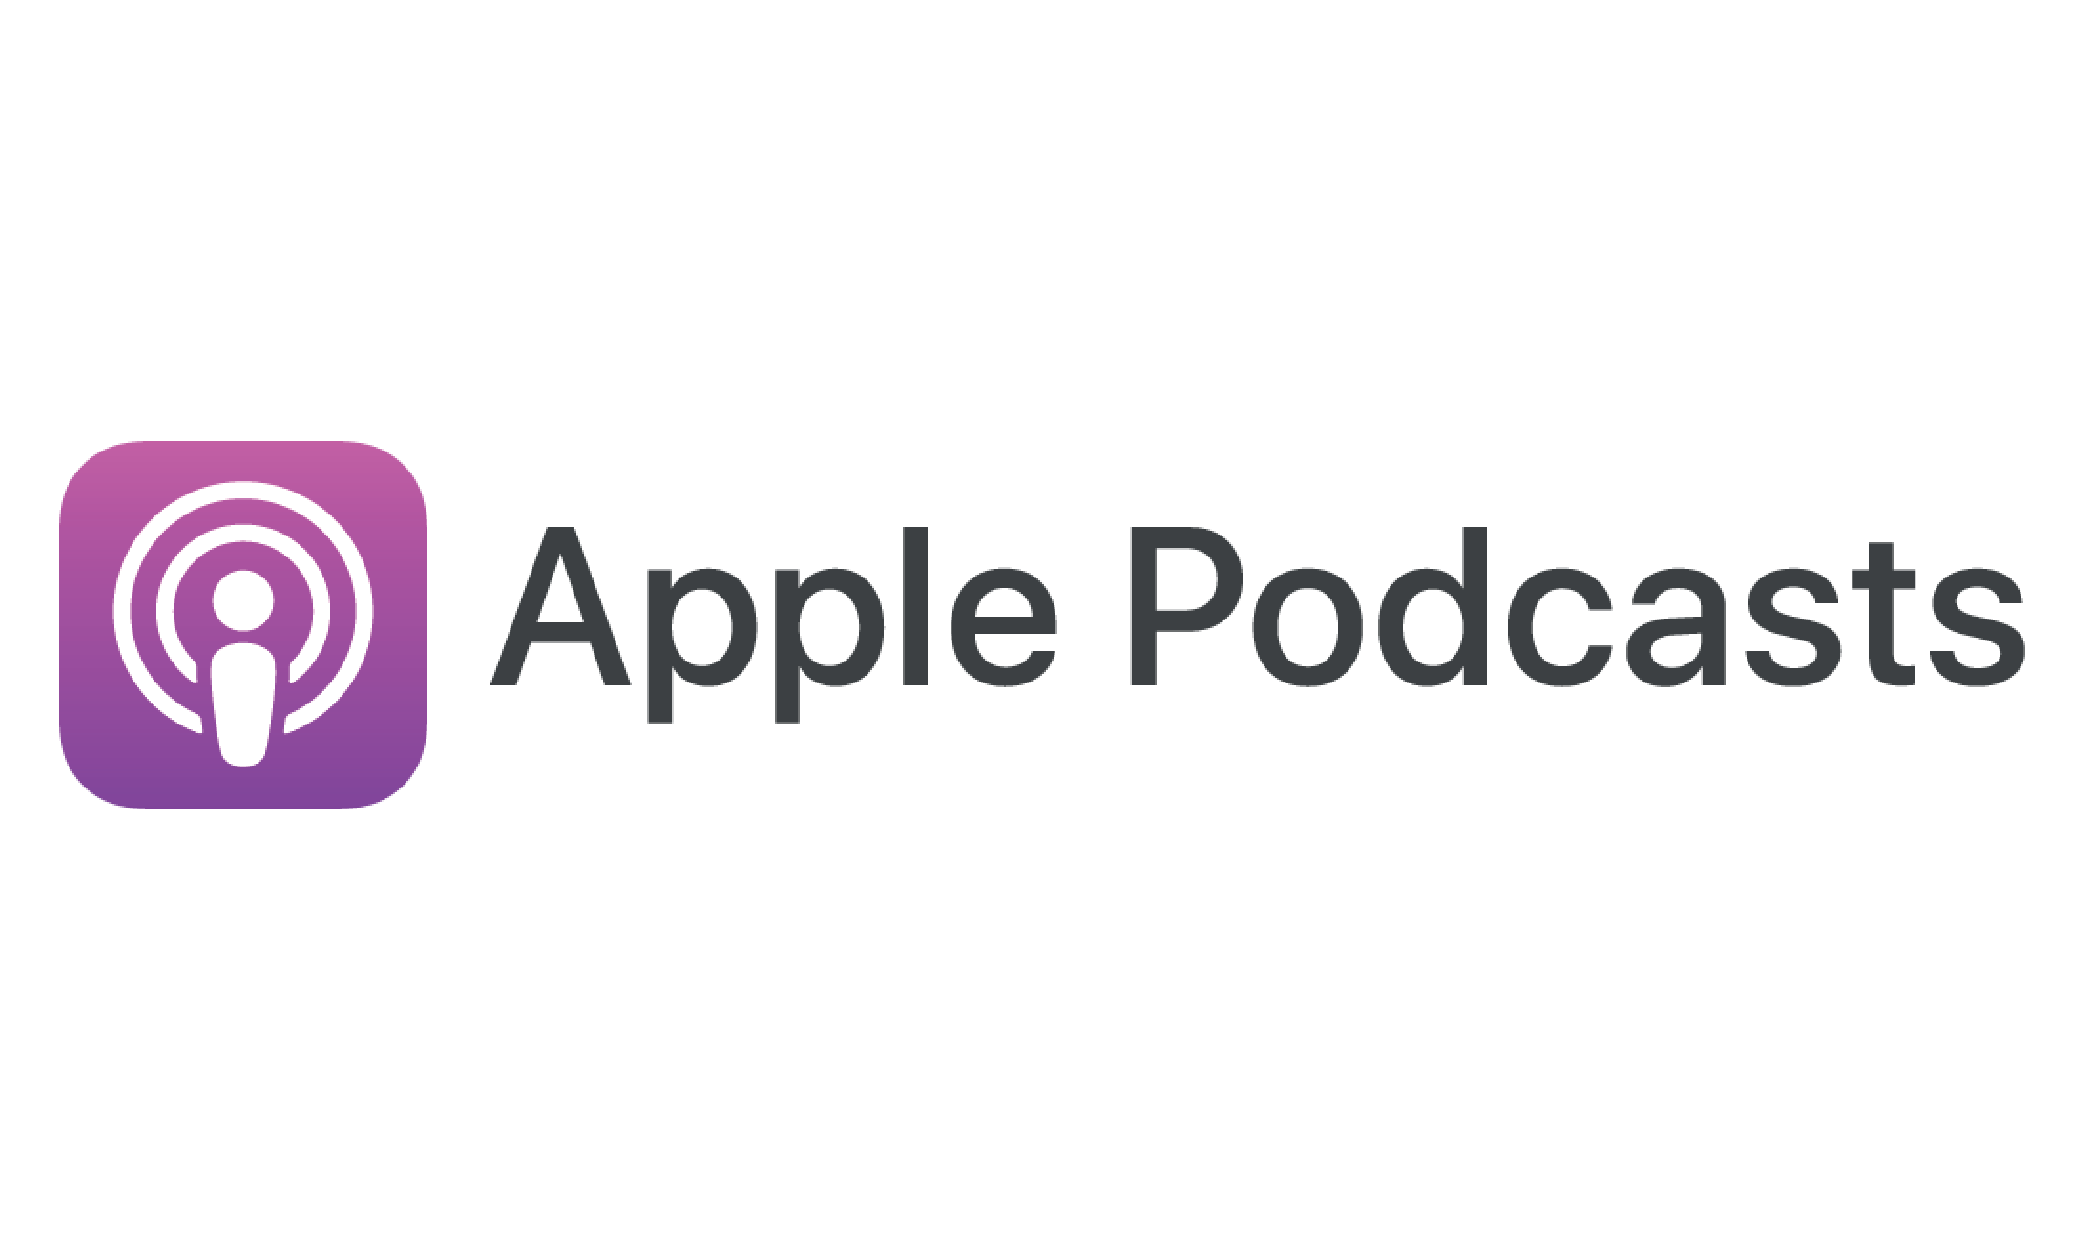 MCMT: hdhdhdhdh on Apple Podcasts